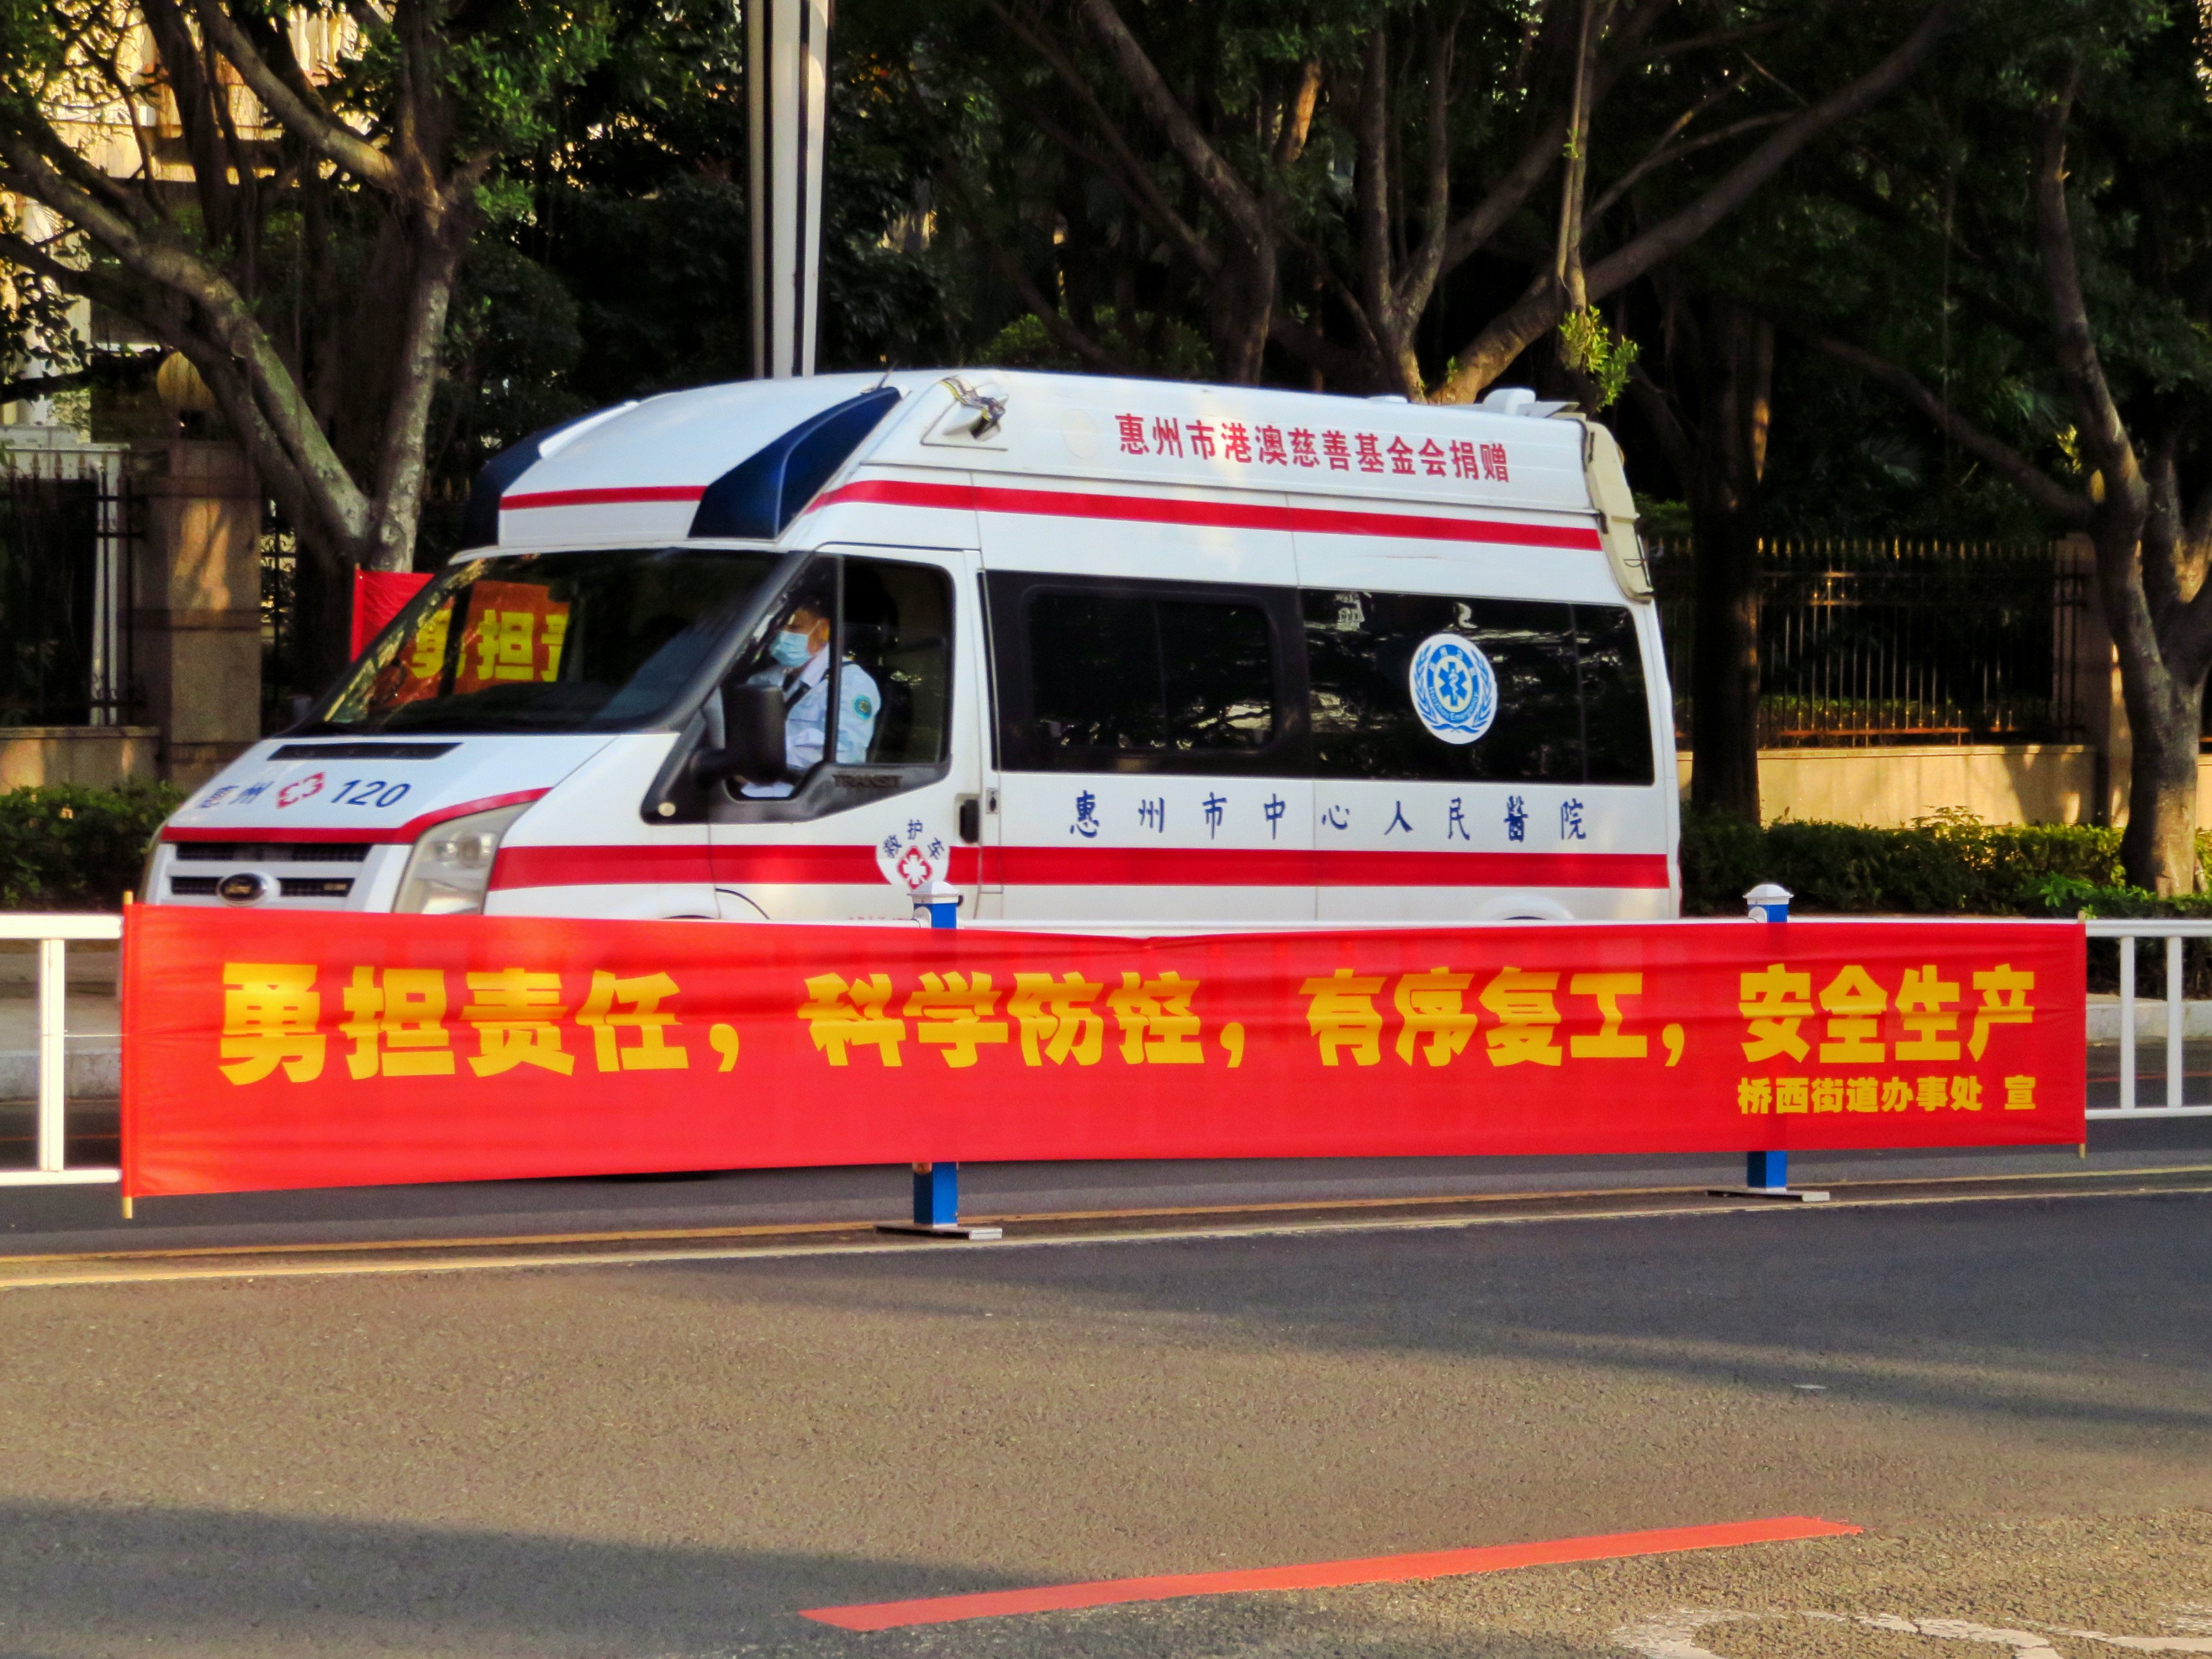 

Ambulances from mainland China will soon be able to do door-to-door transfers to Hong Kong hospitals instead of just to the border. Photo: Shutterstock